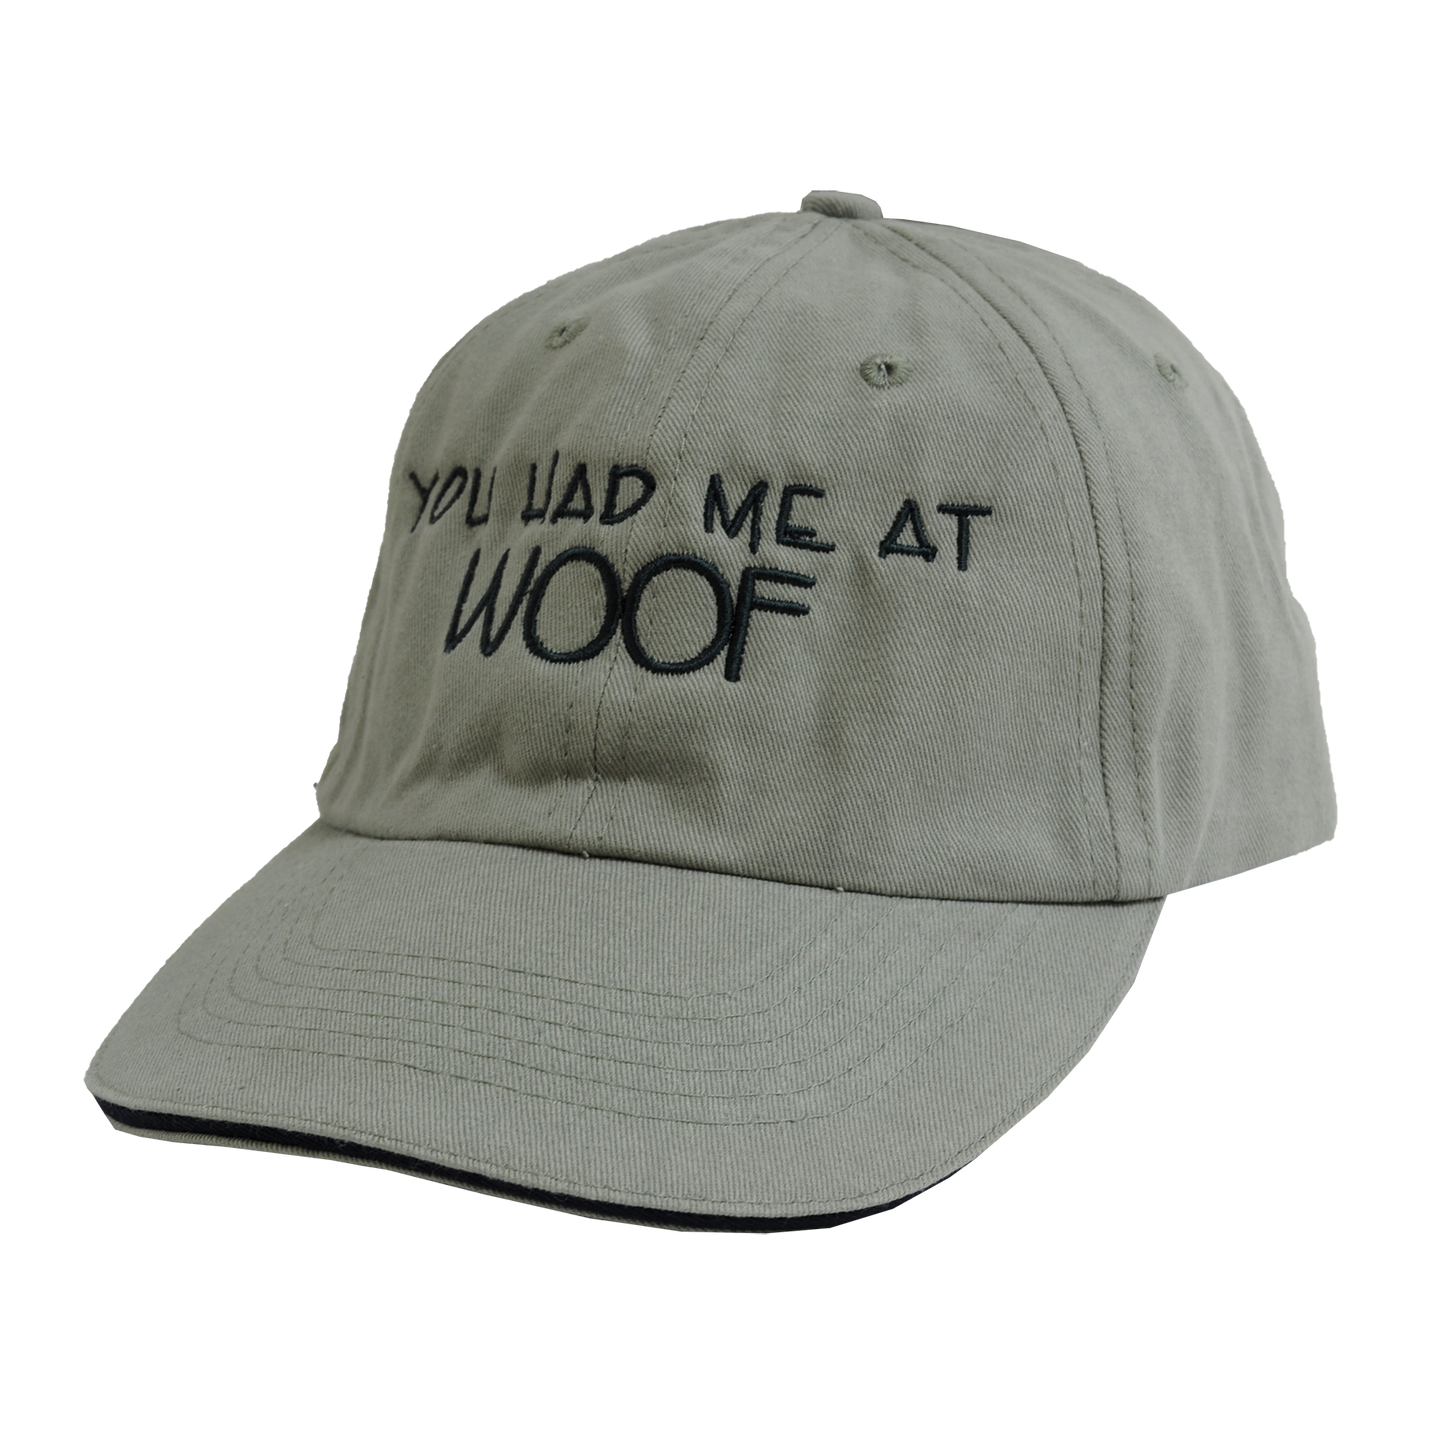 Pet Collection "You Had Me at WOOF" 100% Cotton Adjustable Sports Cap.